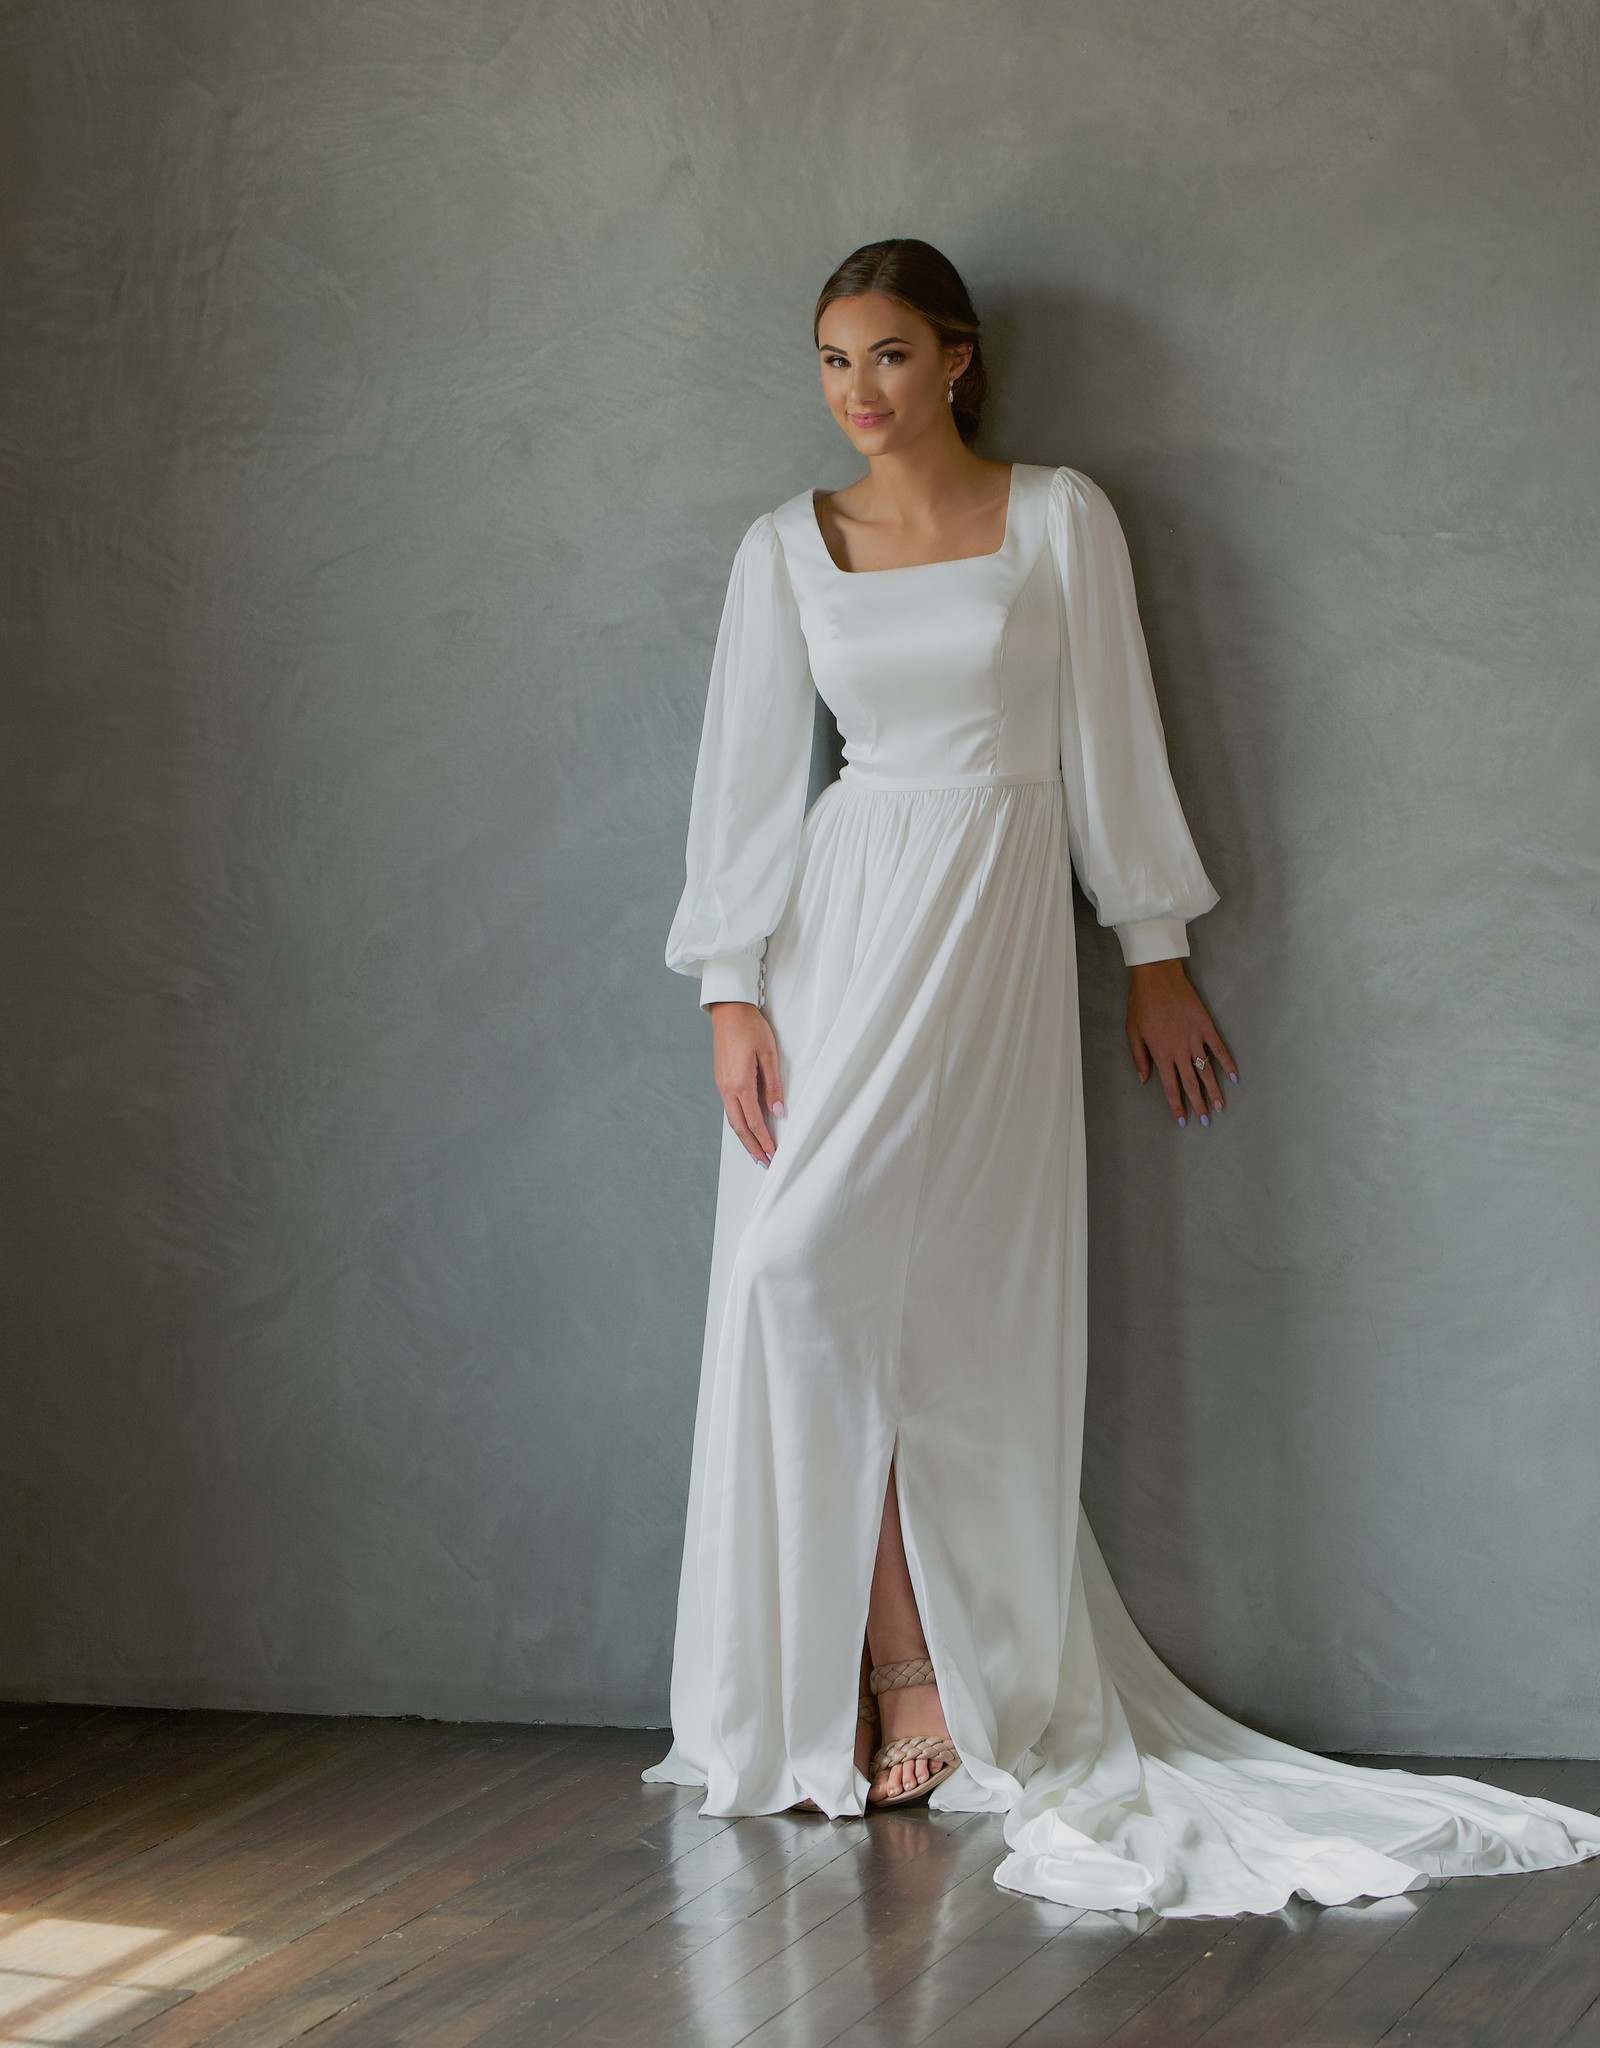 The Modest Bridal Collection Sadie